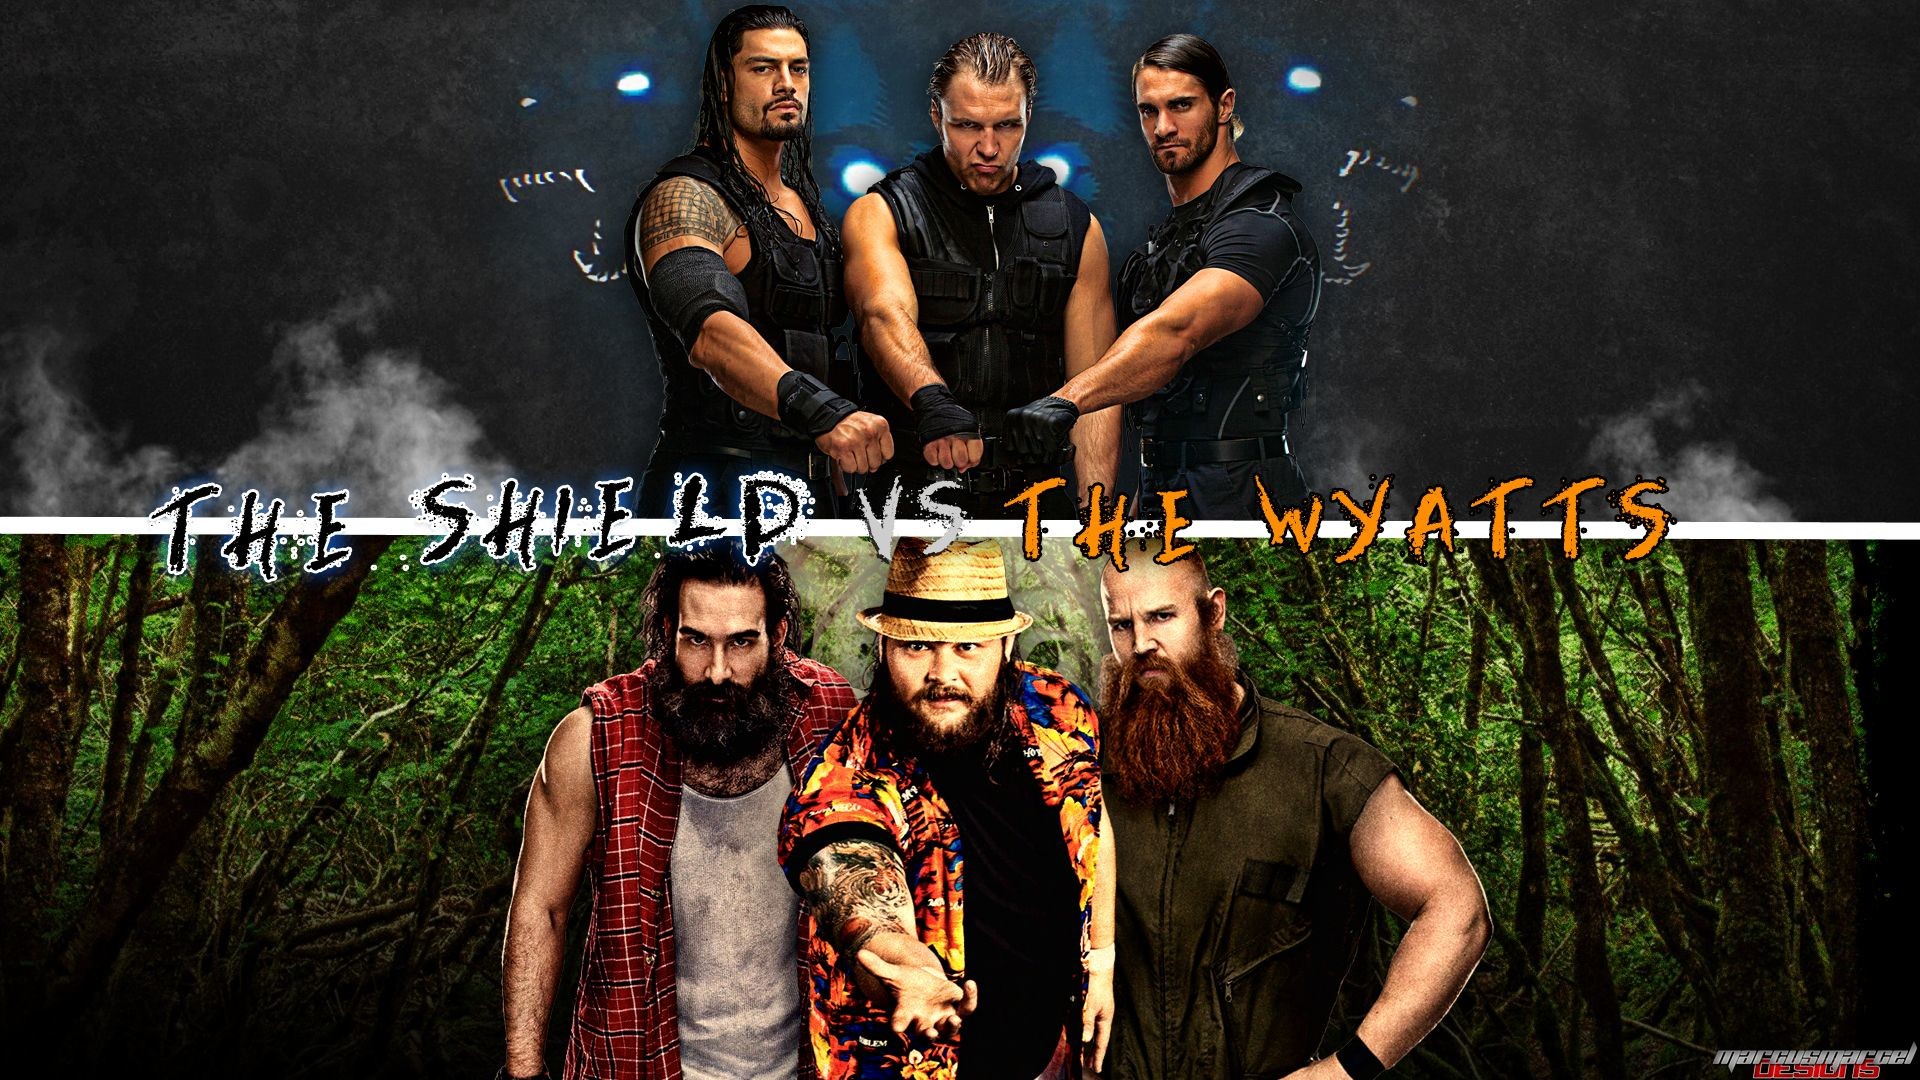 1920x1080 The Shield Vs The Wyatts WWE Wallpaper - DreamLoveWallpapers